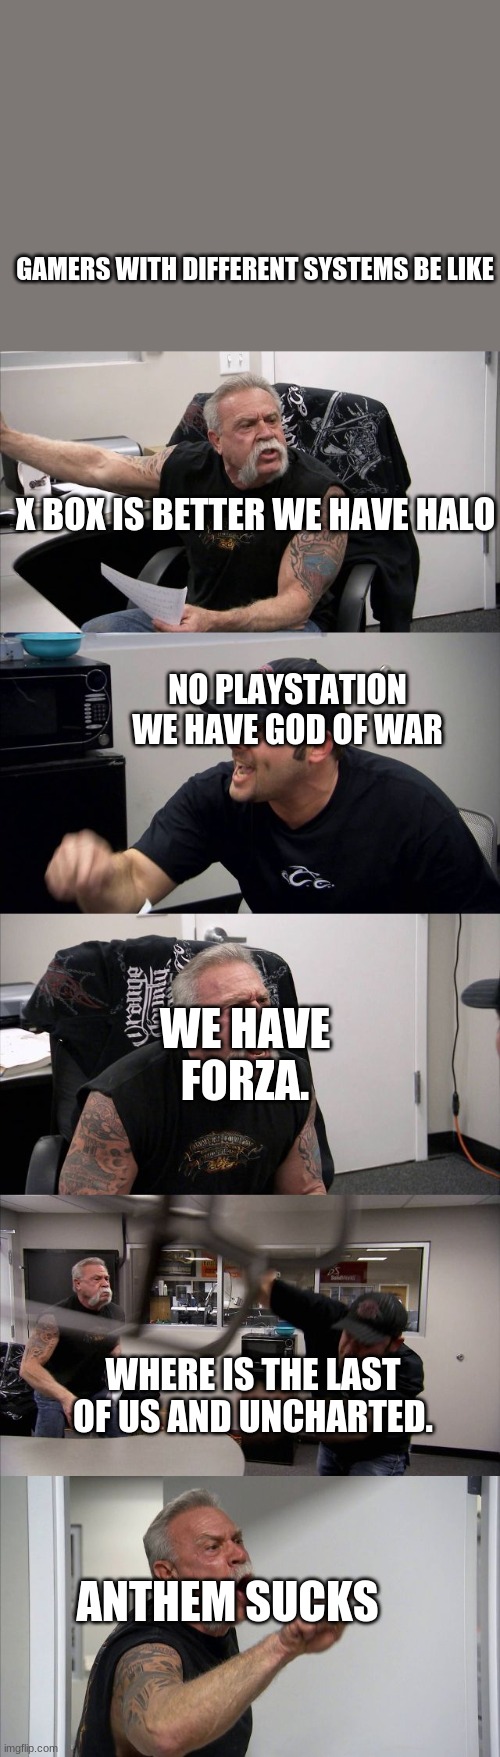 American Chopper Argument | GAMERS WITH DIFFERENT SYSTEMS BE LIKE; X BOX IS BETTER WE HAVE HALO; NO PLAYSTATION WE HAVE GOD OF WAR; WE HAVE FORZA. WHERE IS THE LAST OF US AND UNCHARTED. ANTHEM SUCKS | image tagged in memes,american chopper argument | made w/ Imgflip meme maker